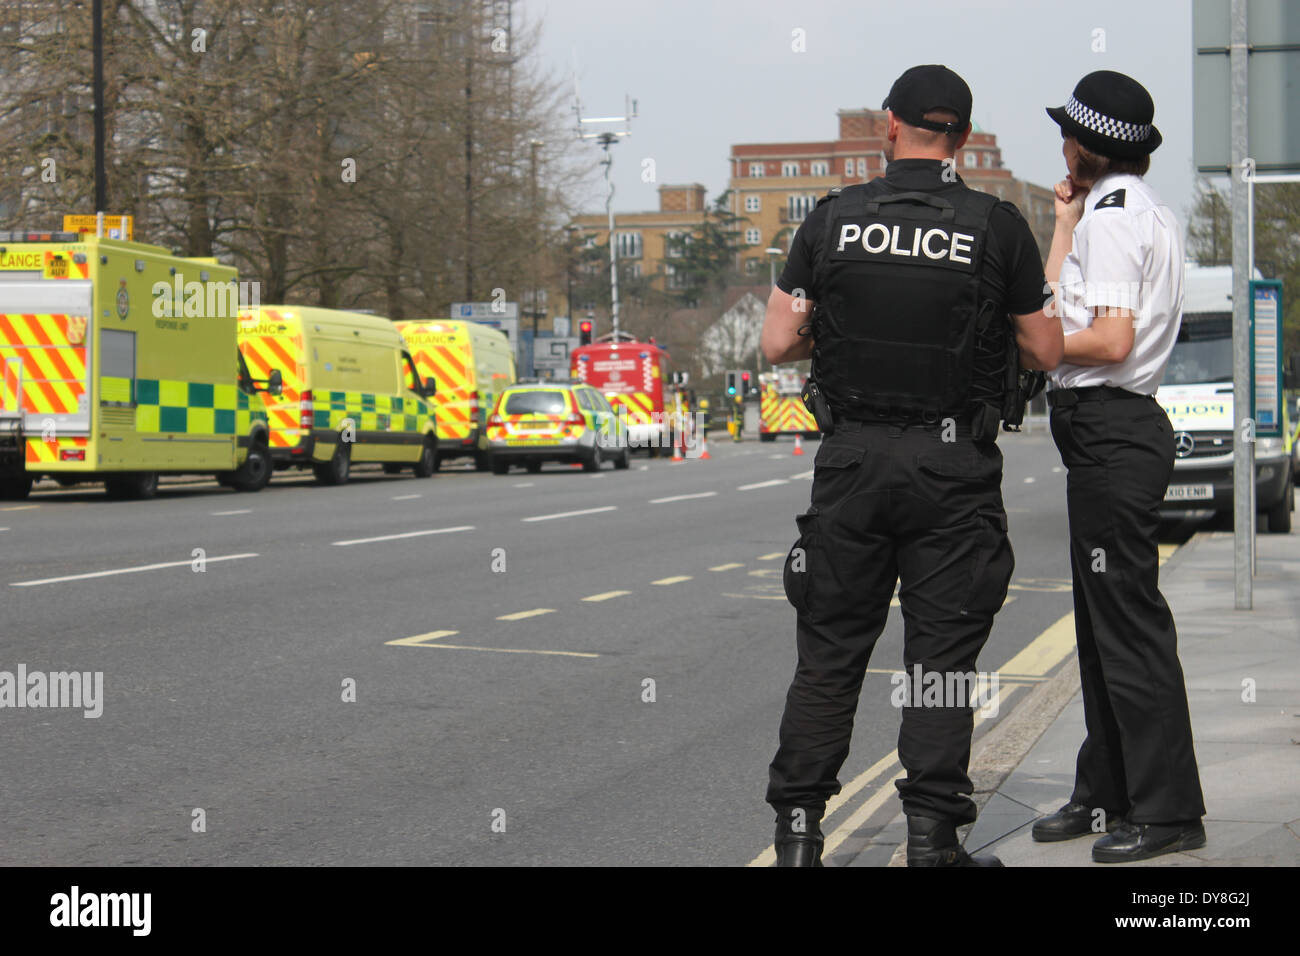 Police Officers look on at a fire scene Stock Photo